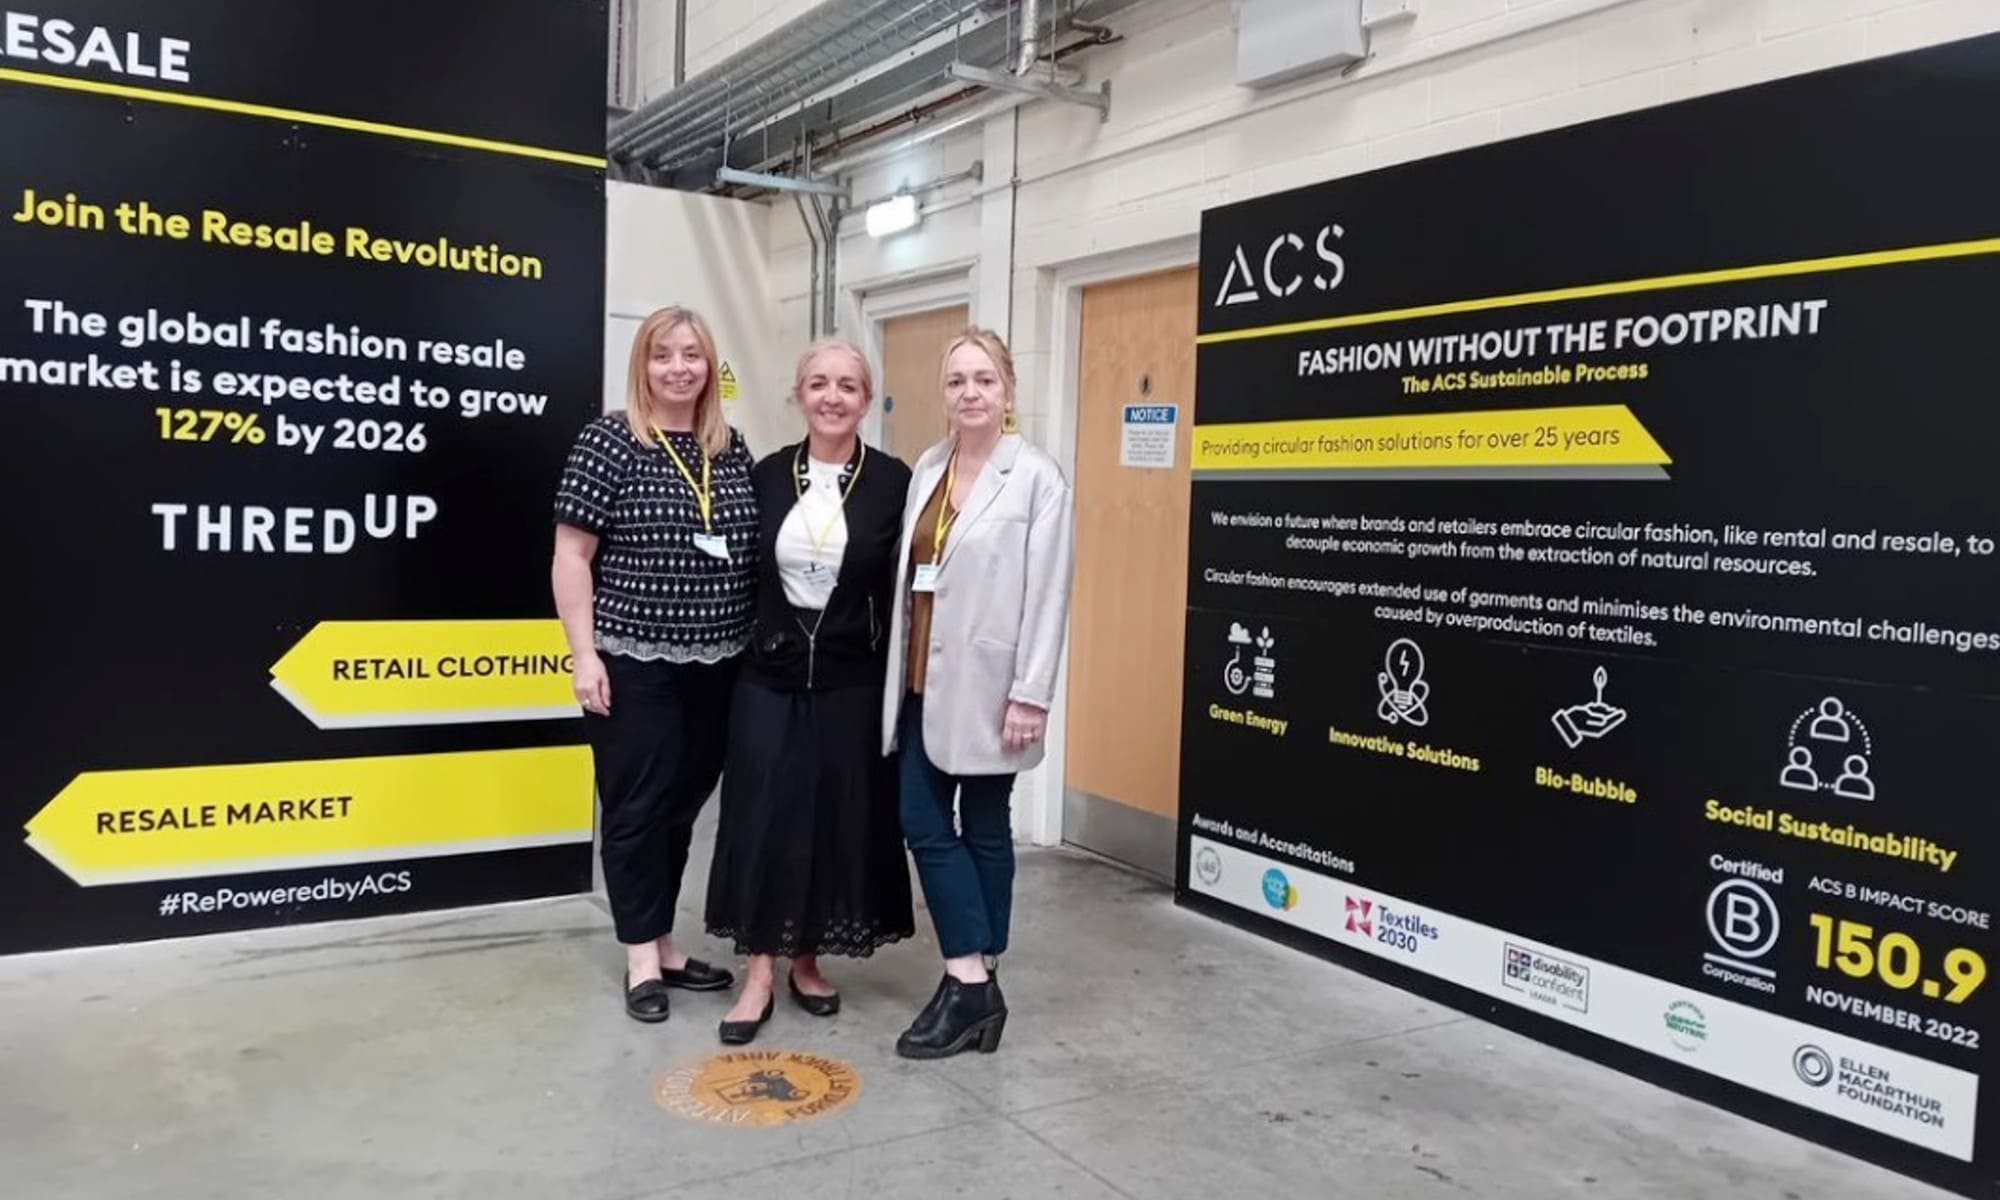 In this case, Marie-Cécile Cervellon EDHEC Professor and Head of the Marketing faculty, and her co-authors, Lindsey Carey, Reader in Marketing at GCU, and Aileen Stewart, Lecturer in Fashion and Marketing at GCU, explore the marketing challenges faced by Advanced Clothing Solutions